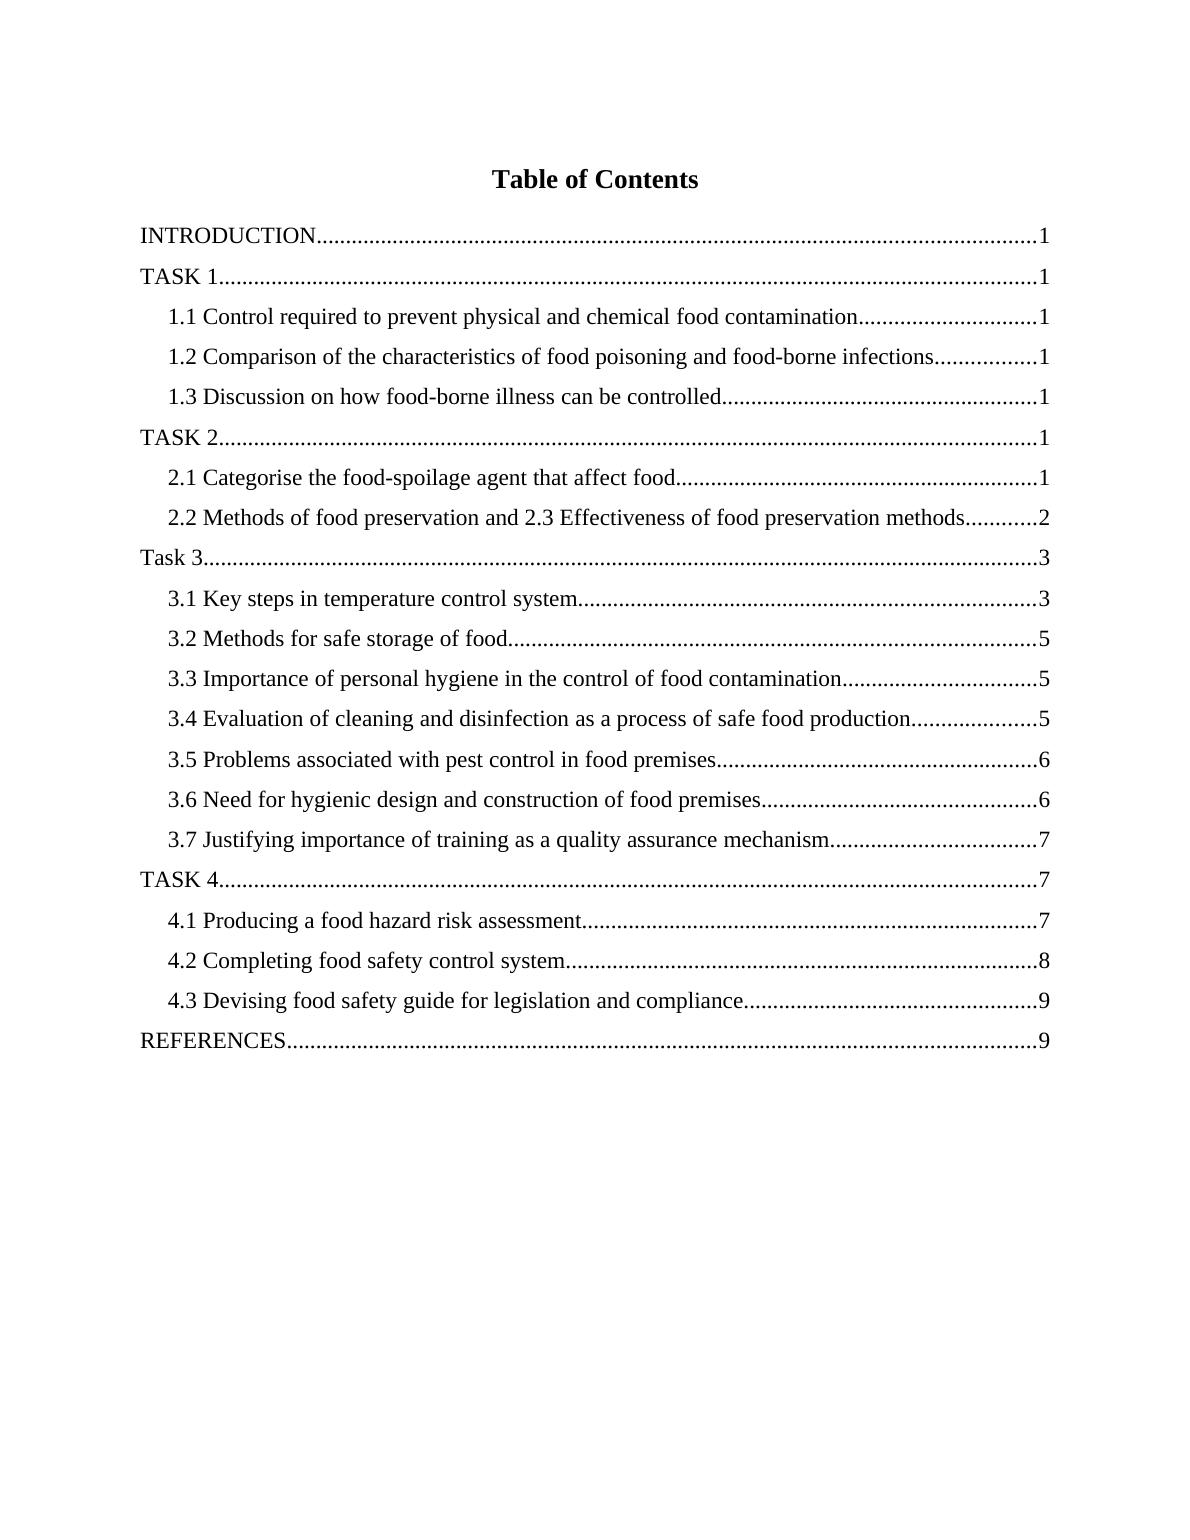 Food Safety Management Assignment Solution - Doc_2